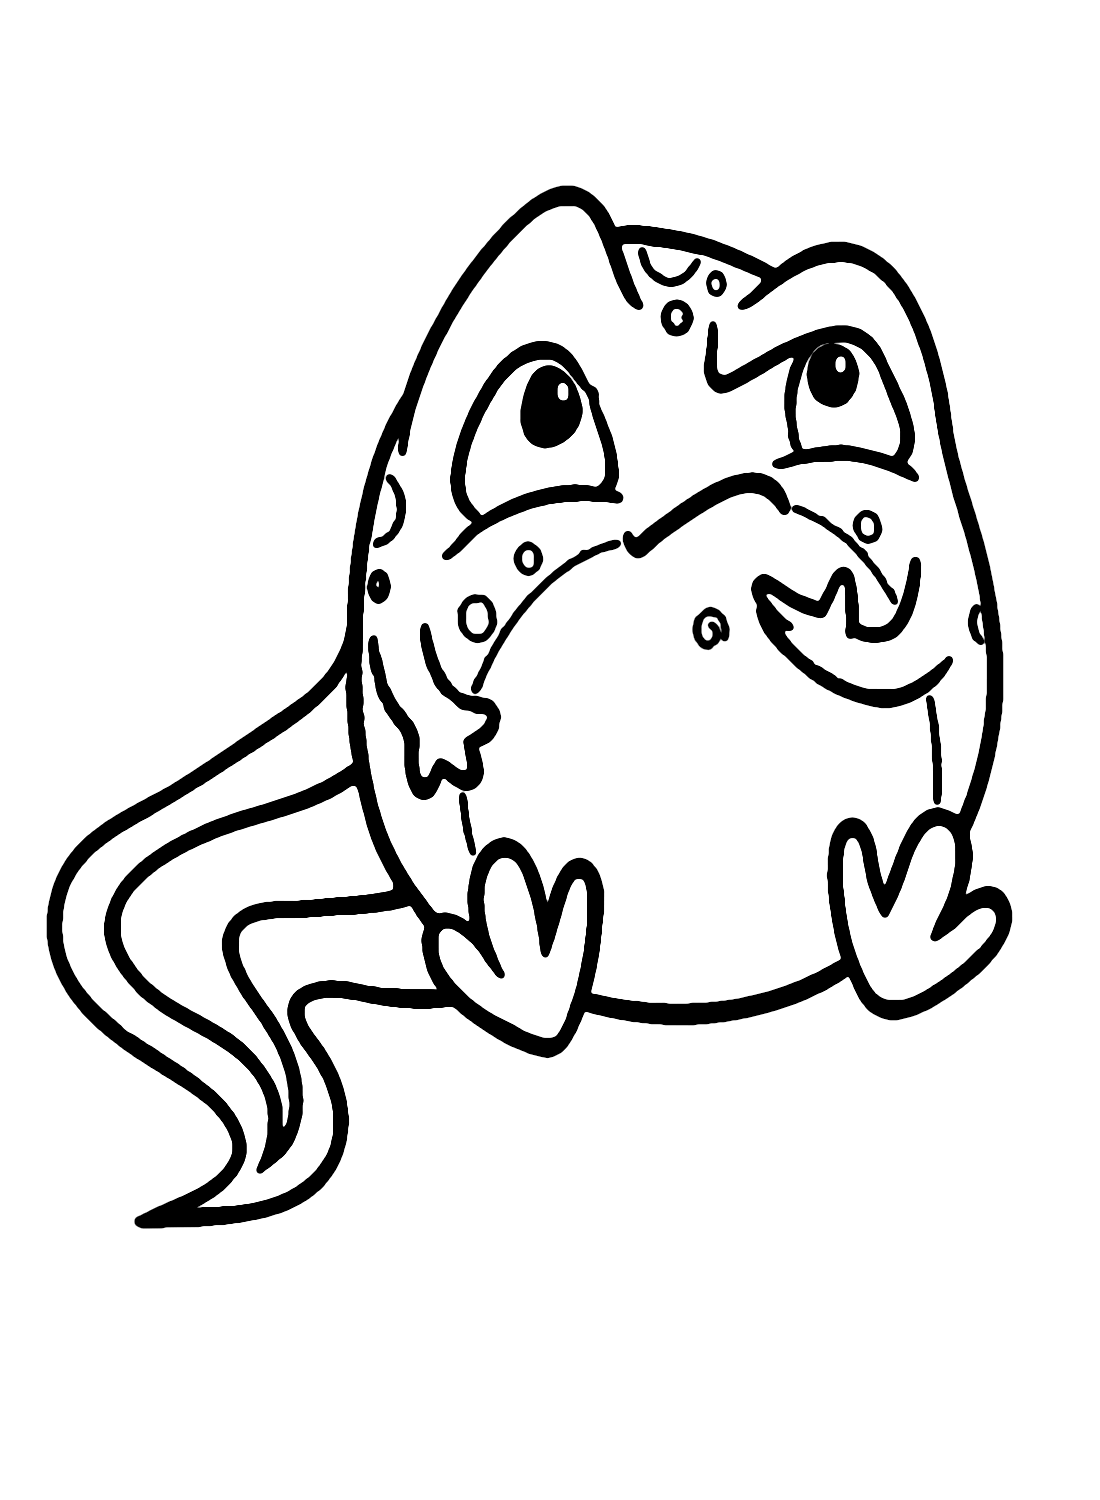 Print Tadpole Coloring Page